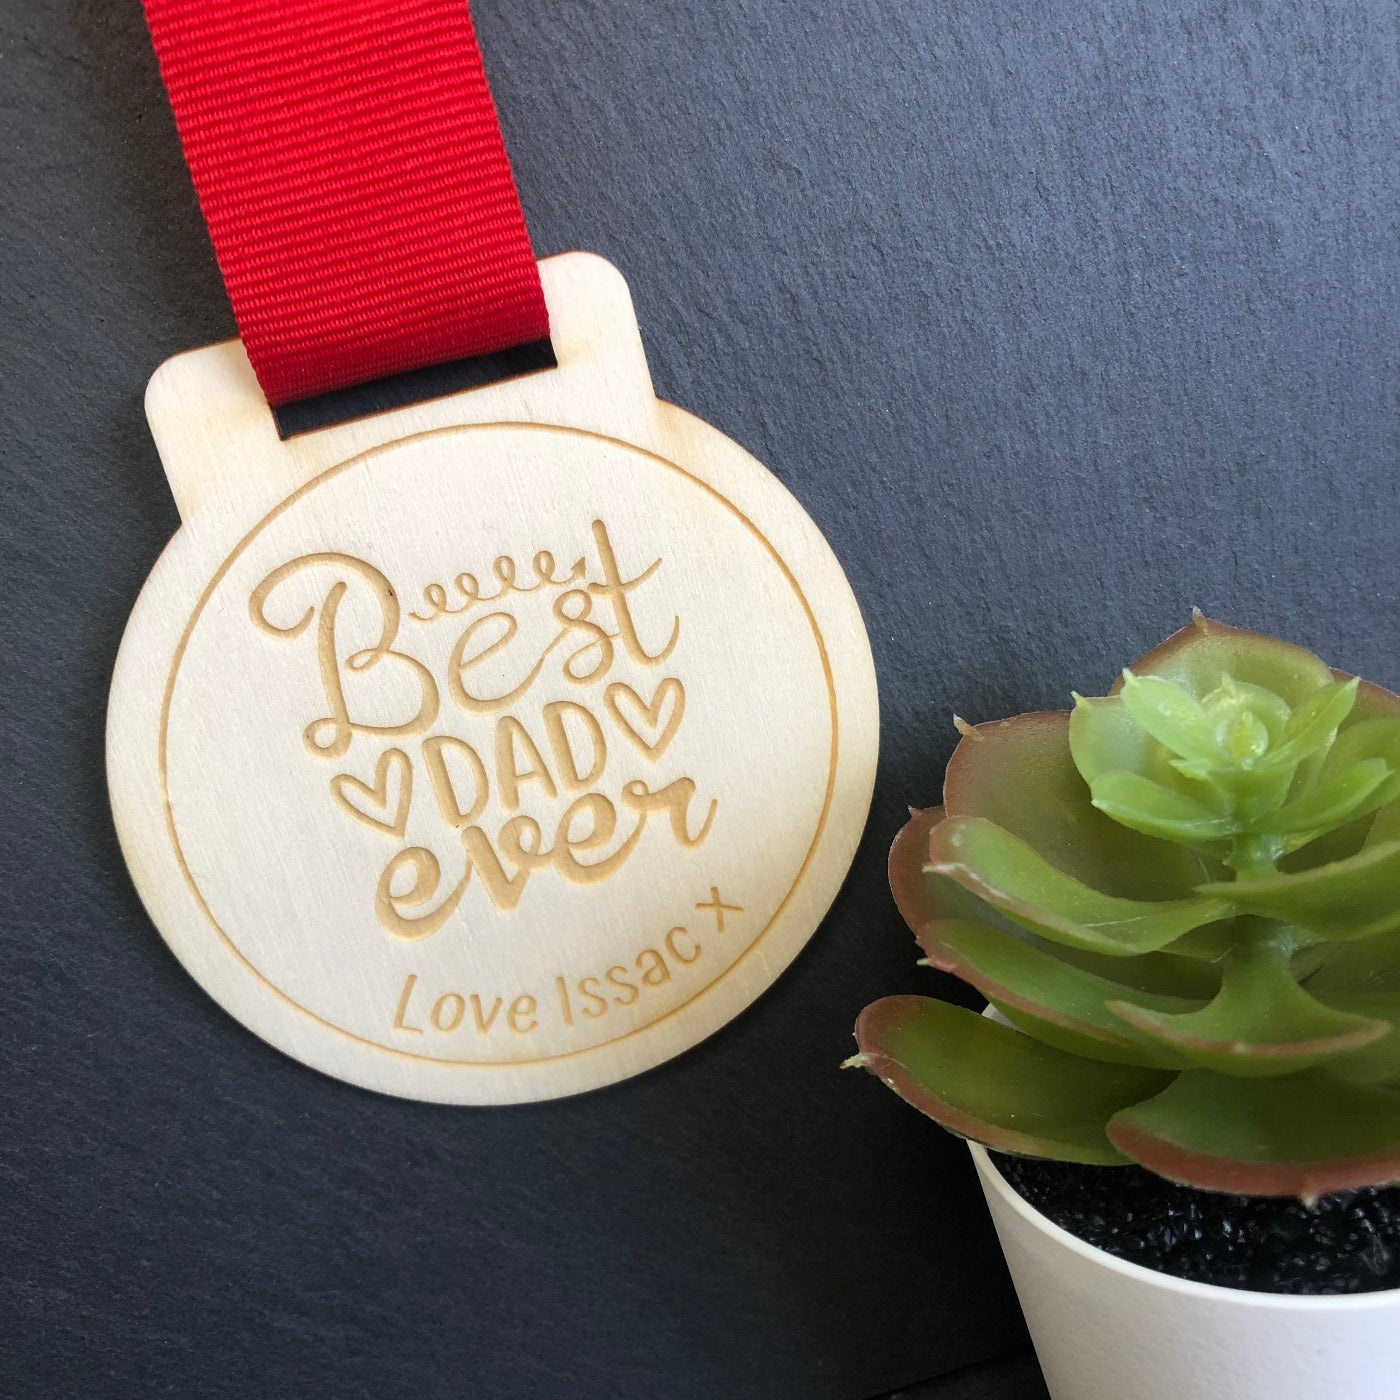 Personalised Best Dad Ever Wooden Medal